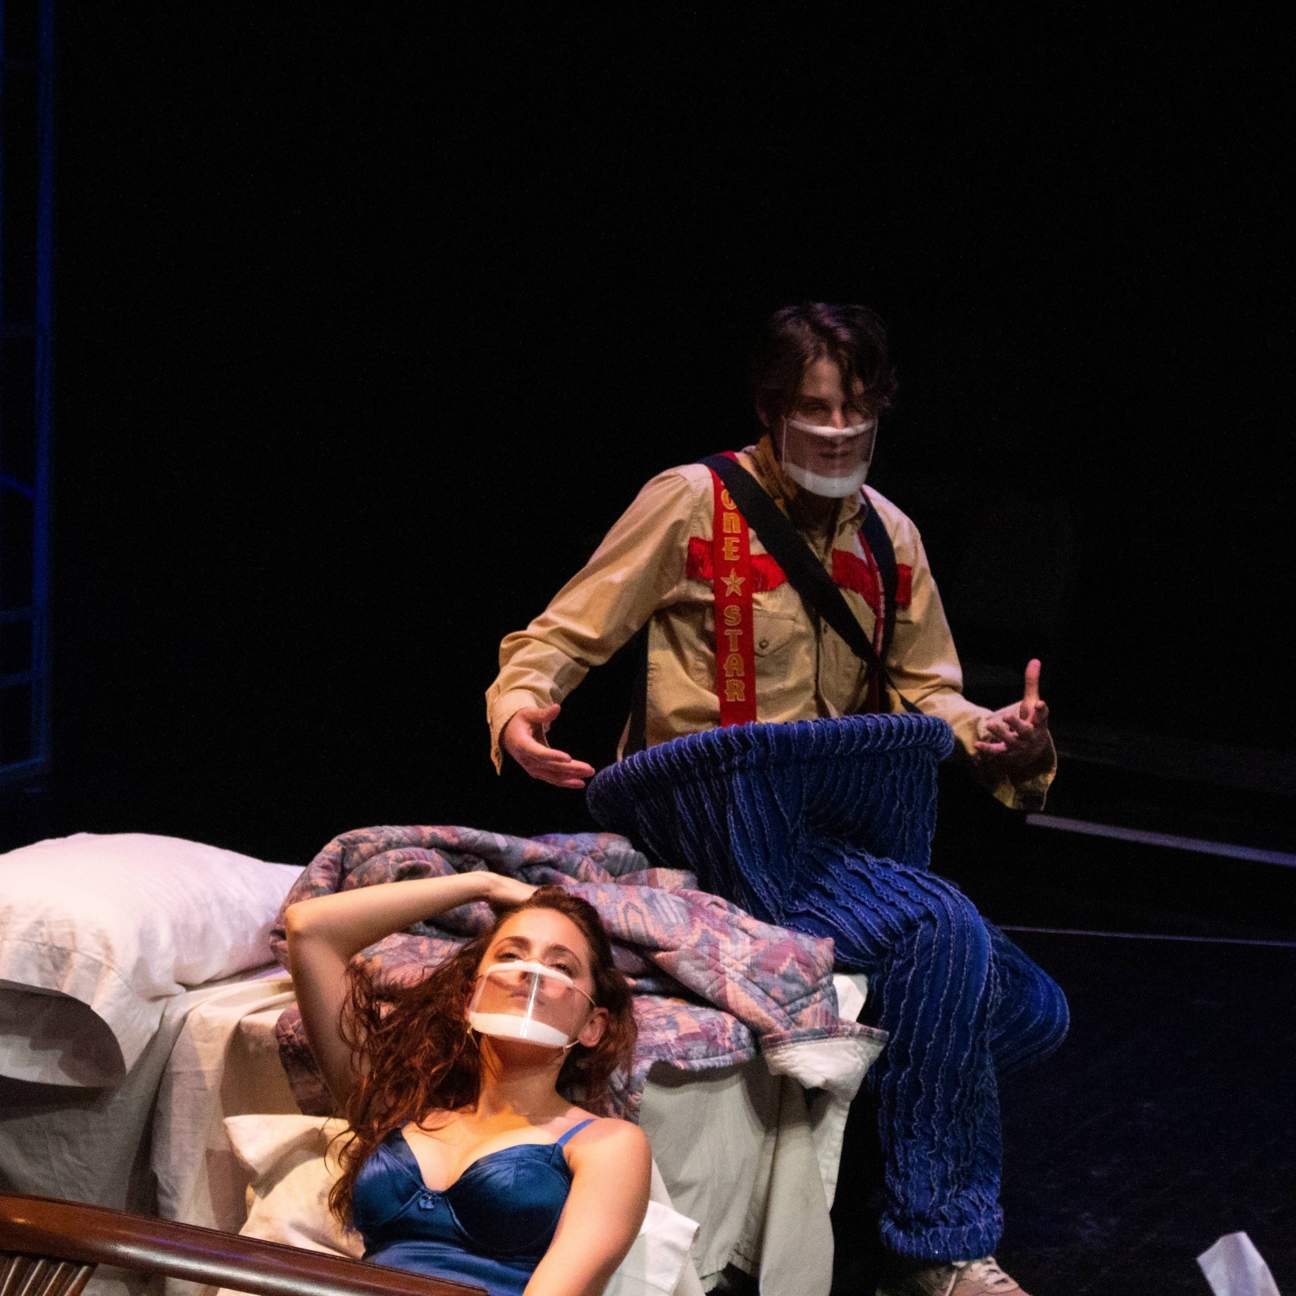 A woman lounges on a bed with one arm above her head, facing away from a man who sits on the bed behind her. The man behind her is wearing oversized pants, suspenders, and other remnants of his costume. 